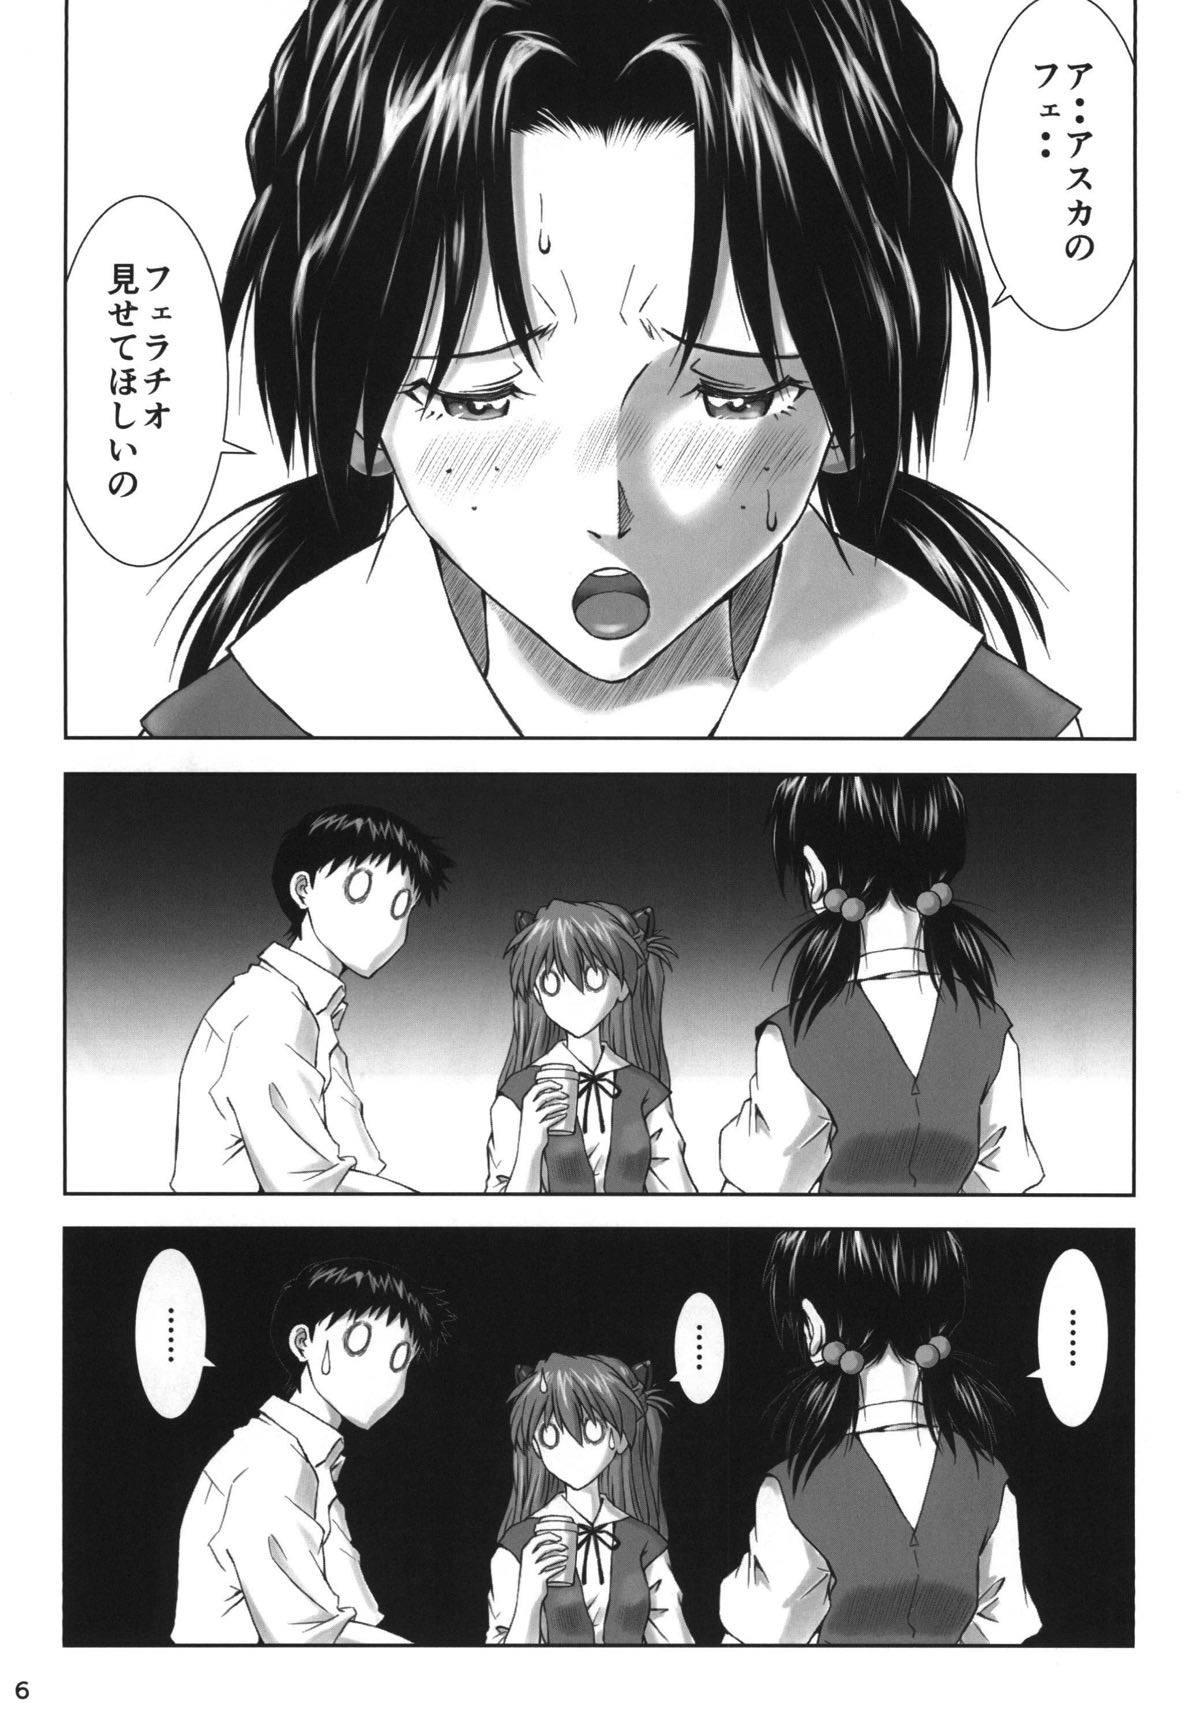 Stepdaughter Let's share it - Neon genesis evangelion Extreme - Page 5